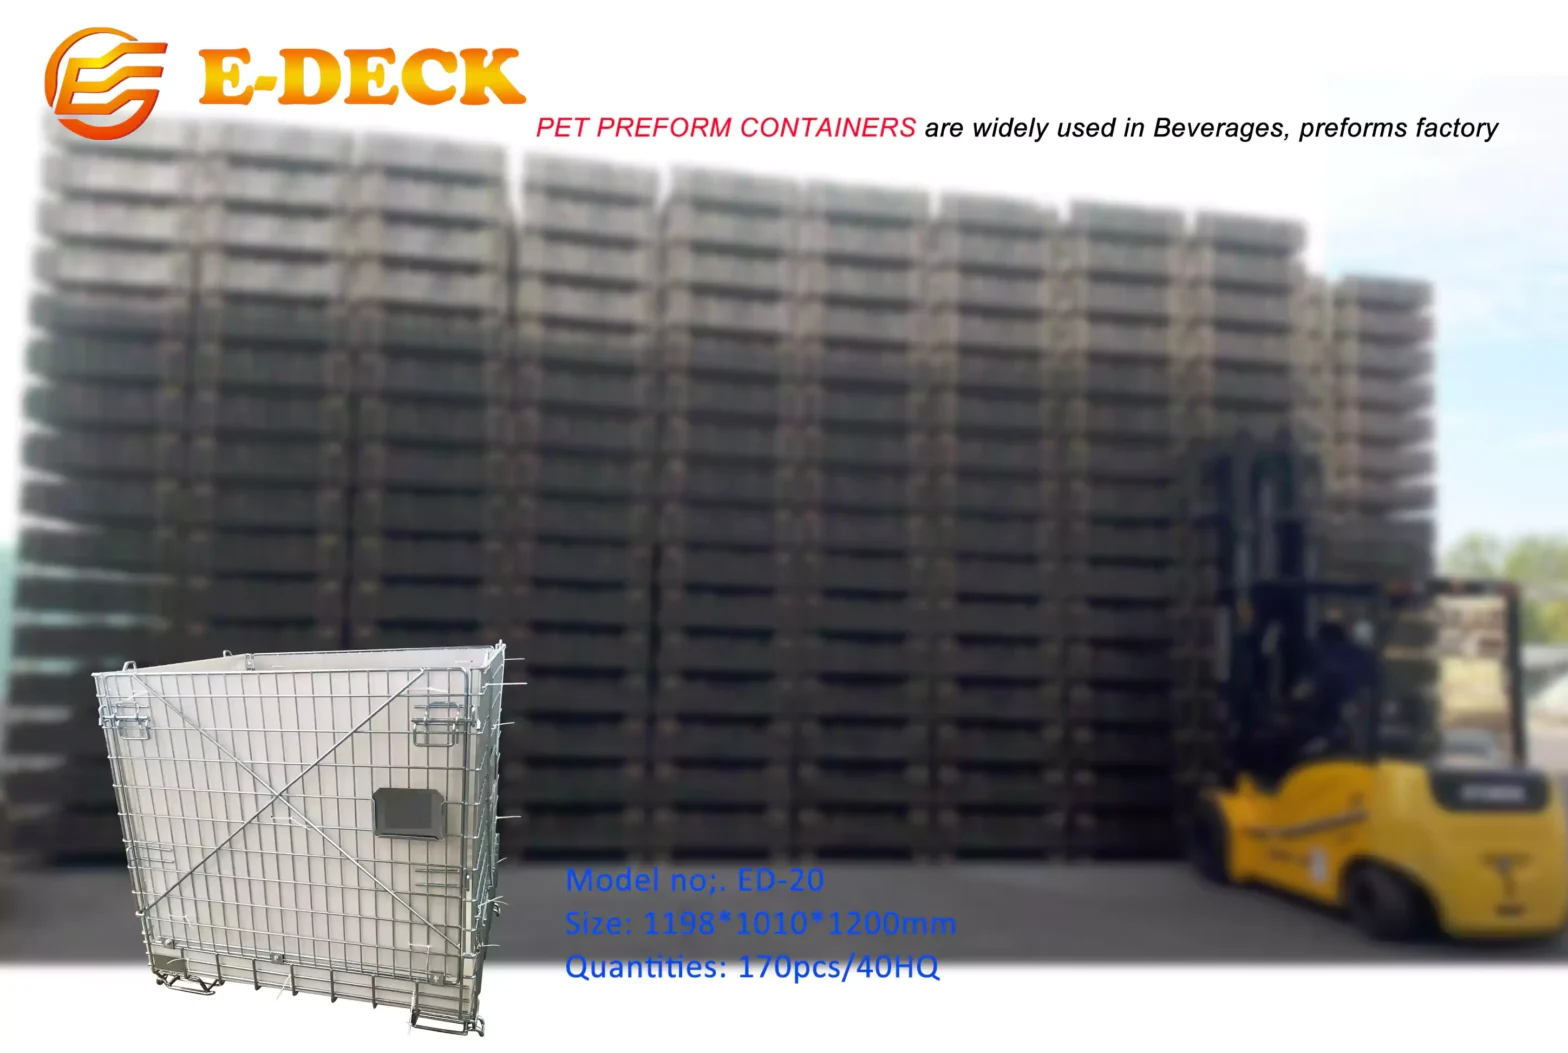 Durable Metal Container for the PET Preform Industry